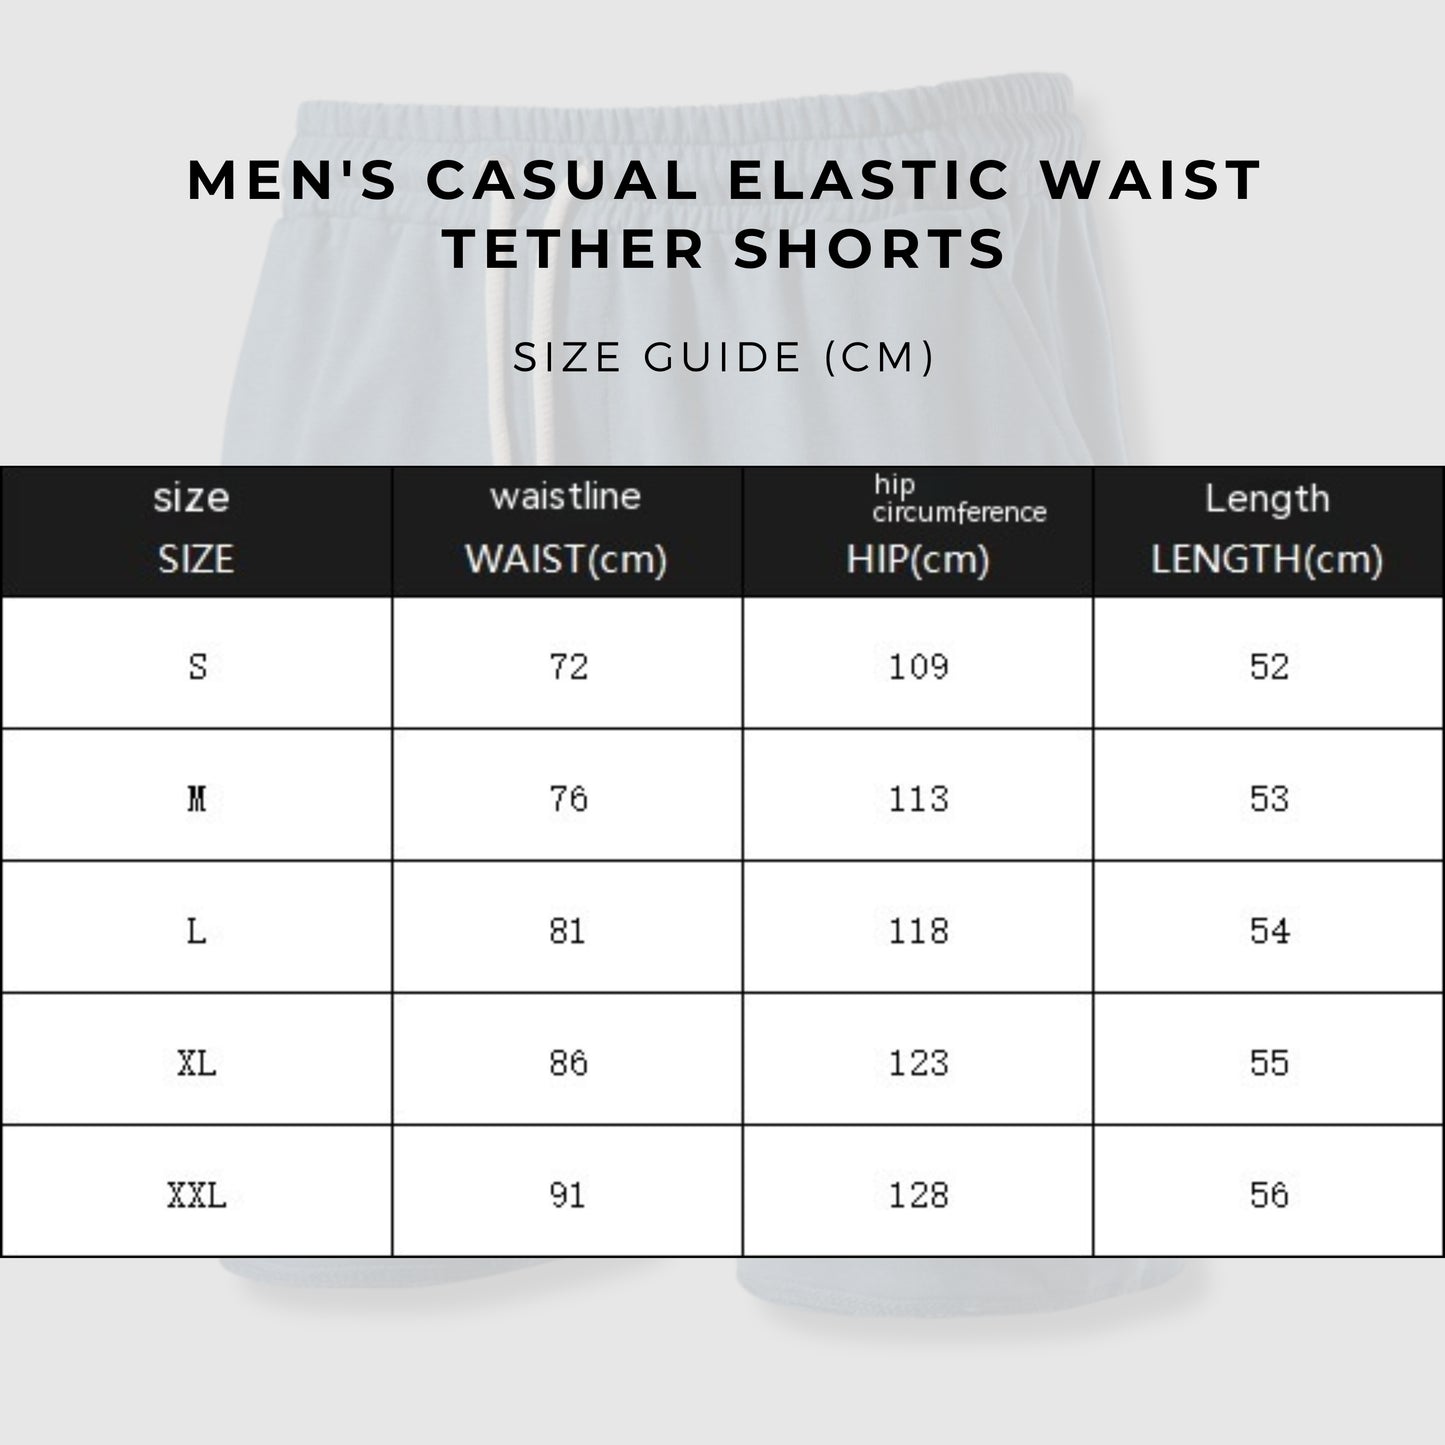 Men's Casual Elastic Waist Tether Shorts size